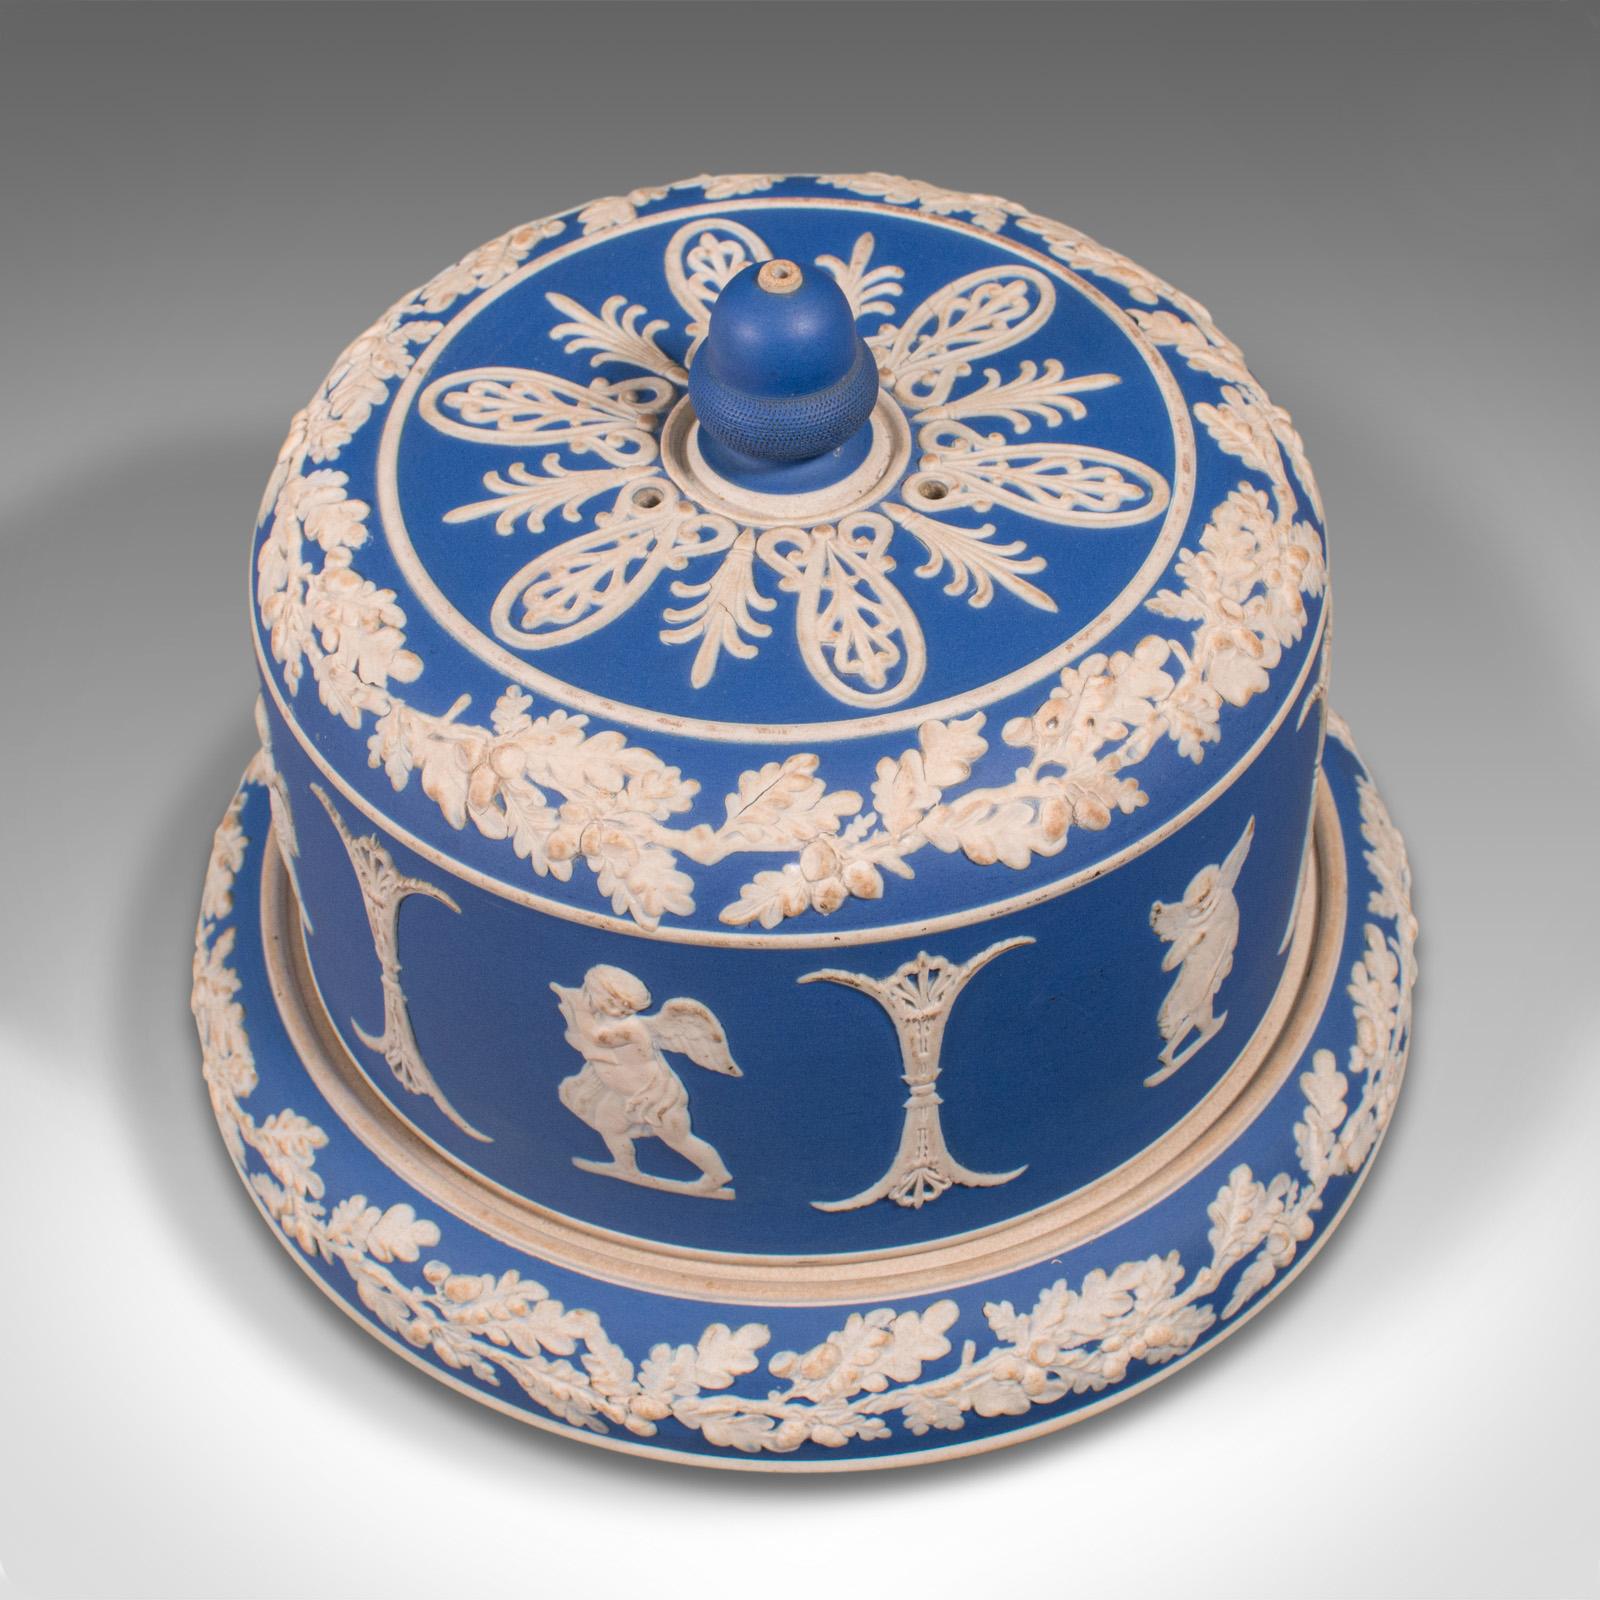 British Antique Cheese Keeper, English, Jasper, Serving Dome, After Wedgwood, Victorian For Sale